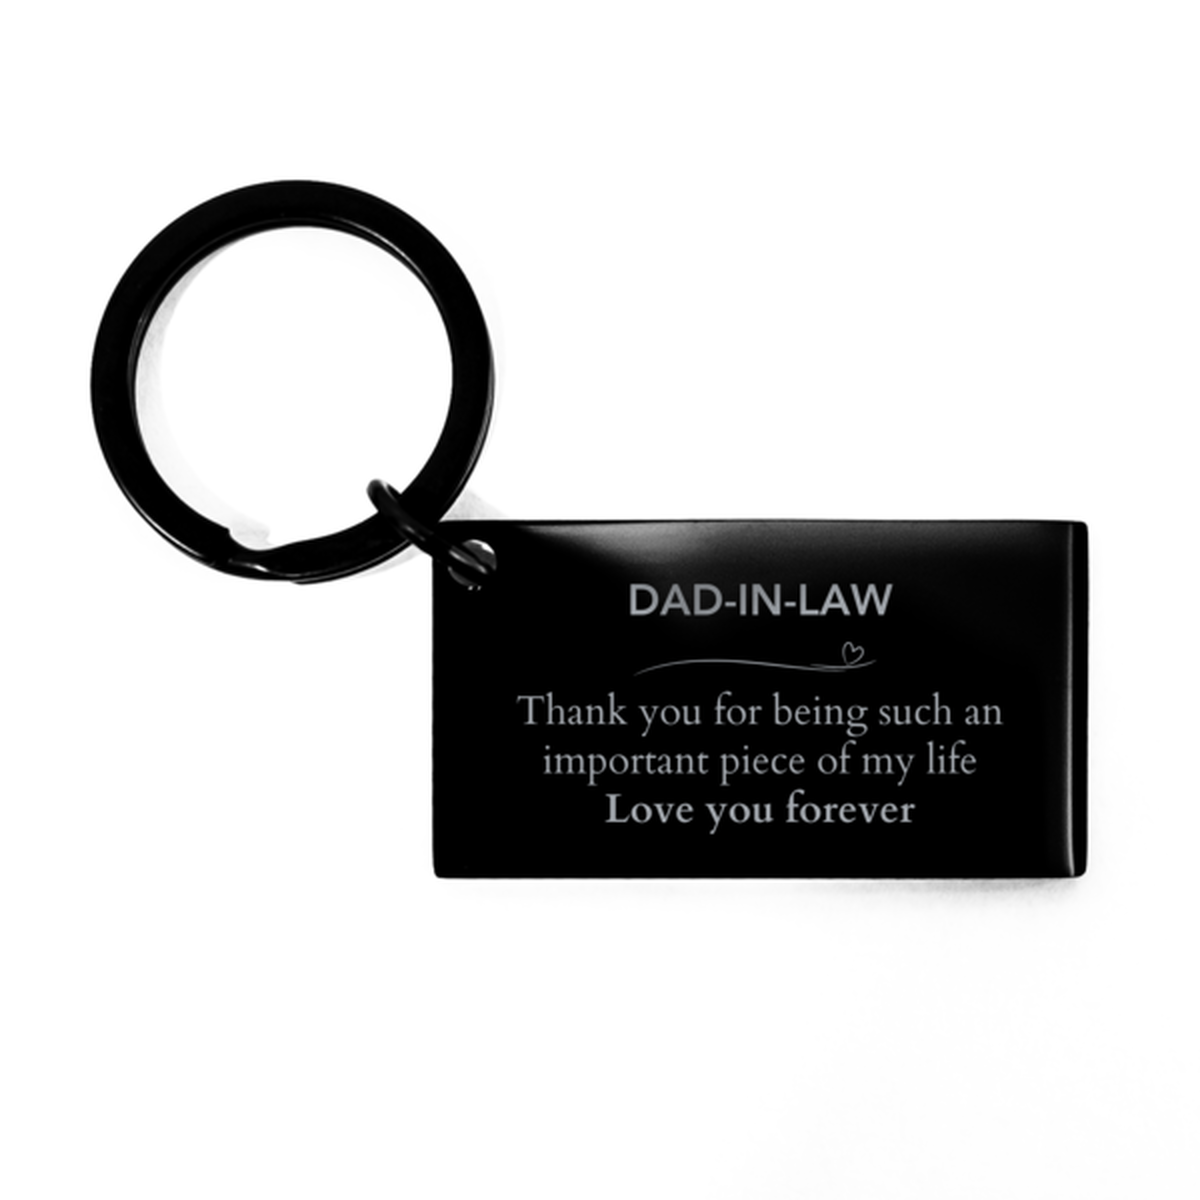 Appropriate Dad-in-law Keychain Epic Birthday Gifts for Dad-in-law Thank you for being such an important piece of my life Dad-in-law Christmas Mothers Fathers Day